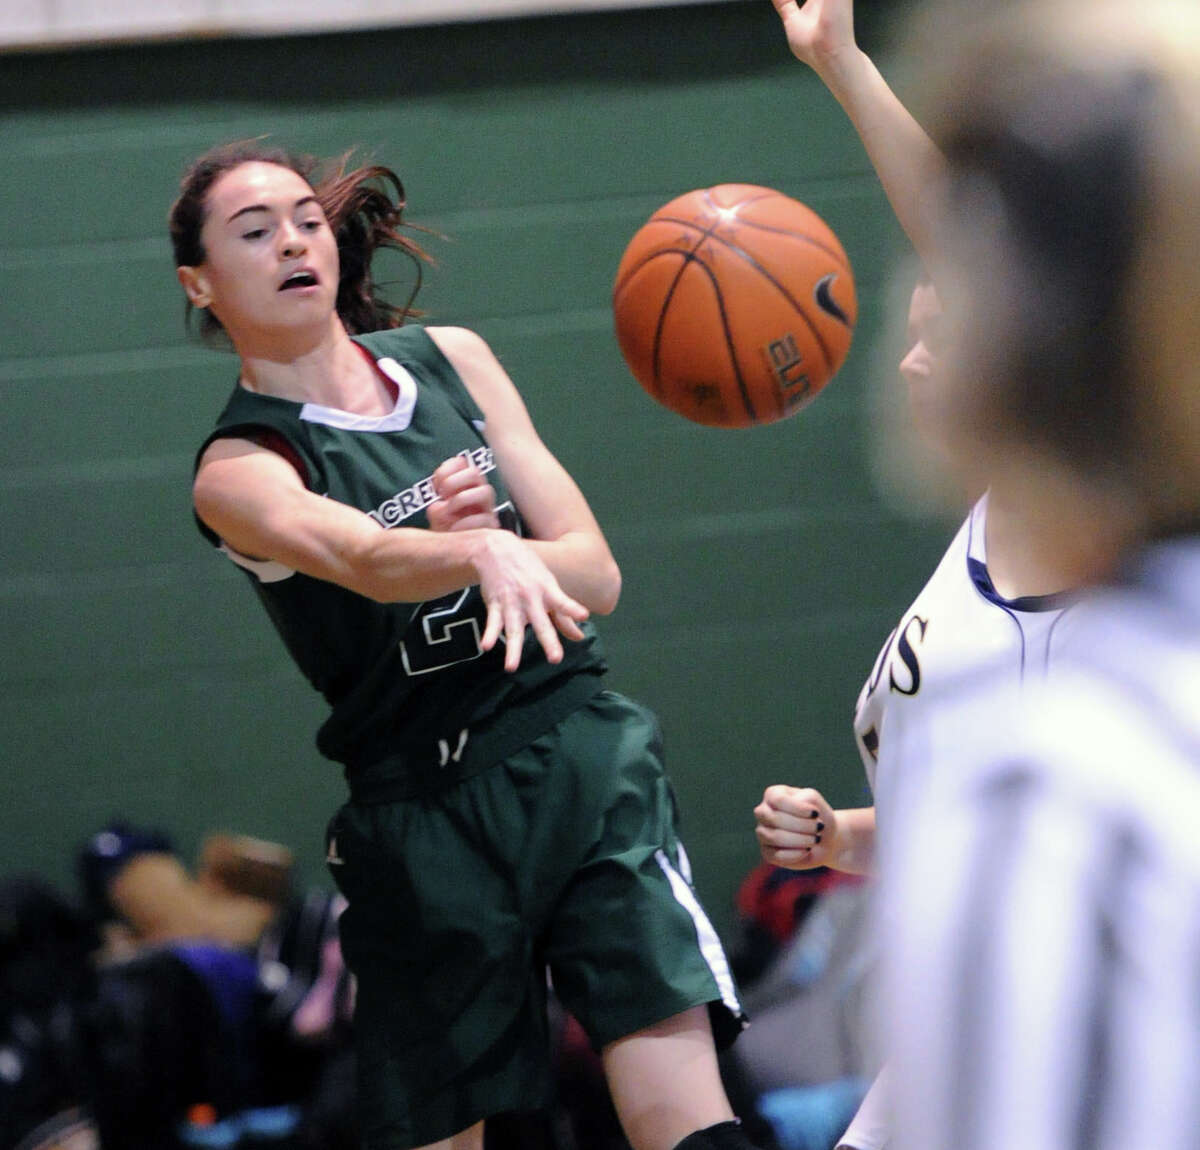 Colleen O'Neill (#23) of Convent of the Sacred Heart passes during the high school basketball game between Convent of the Sacred Heart and Rye Country Day School at Convent in Greenwich, Thursday, Jan. 30, 2014.